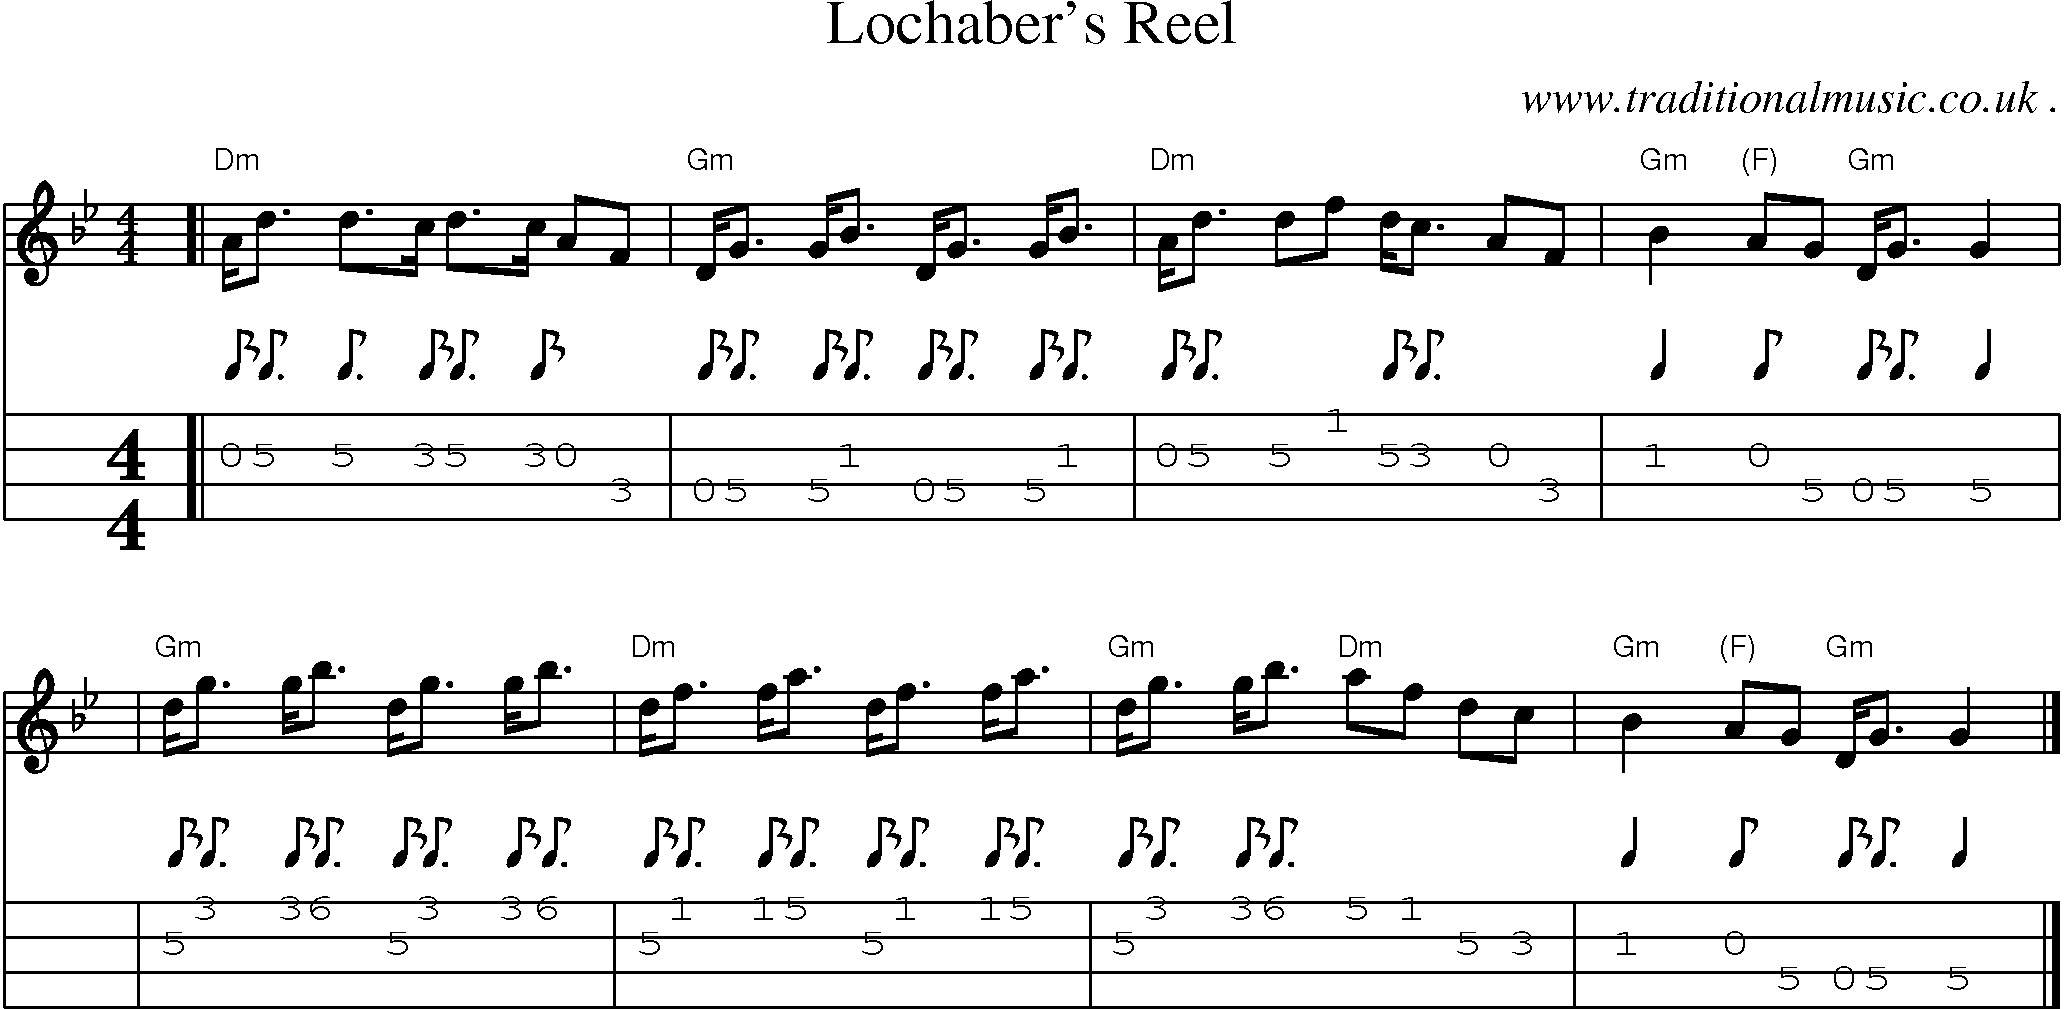 Sheet-music  score, Chords and Mandolin Tabs for Lochabers Reel